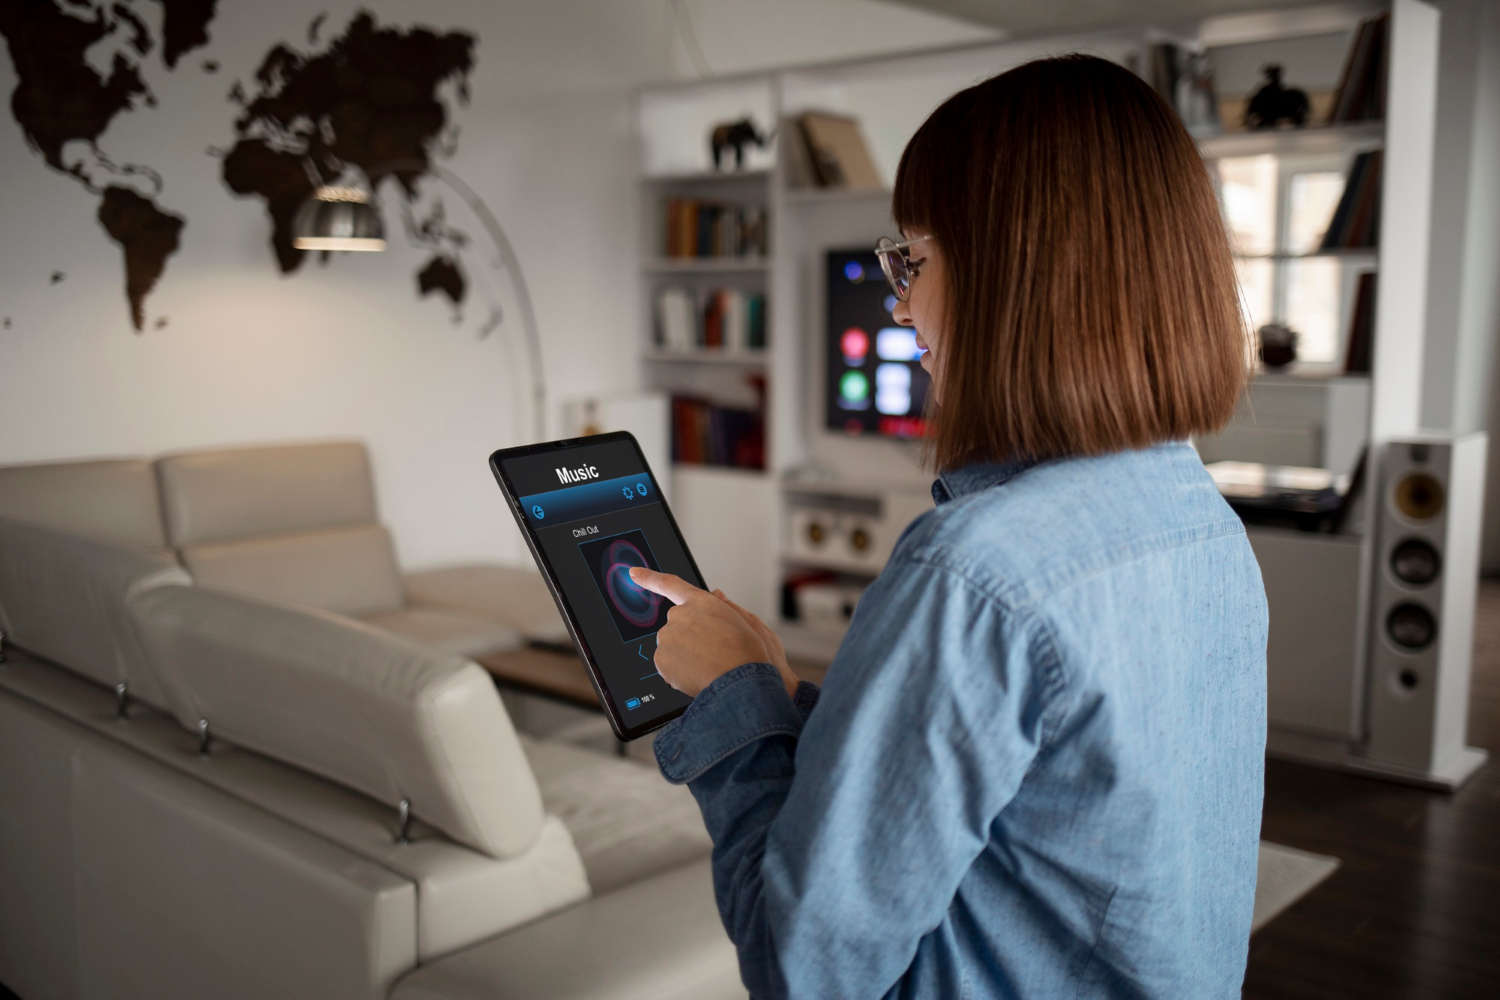 The security concerns and risks associated with smart home technology and how to mitigate them.